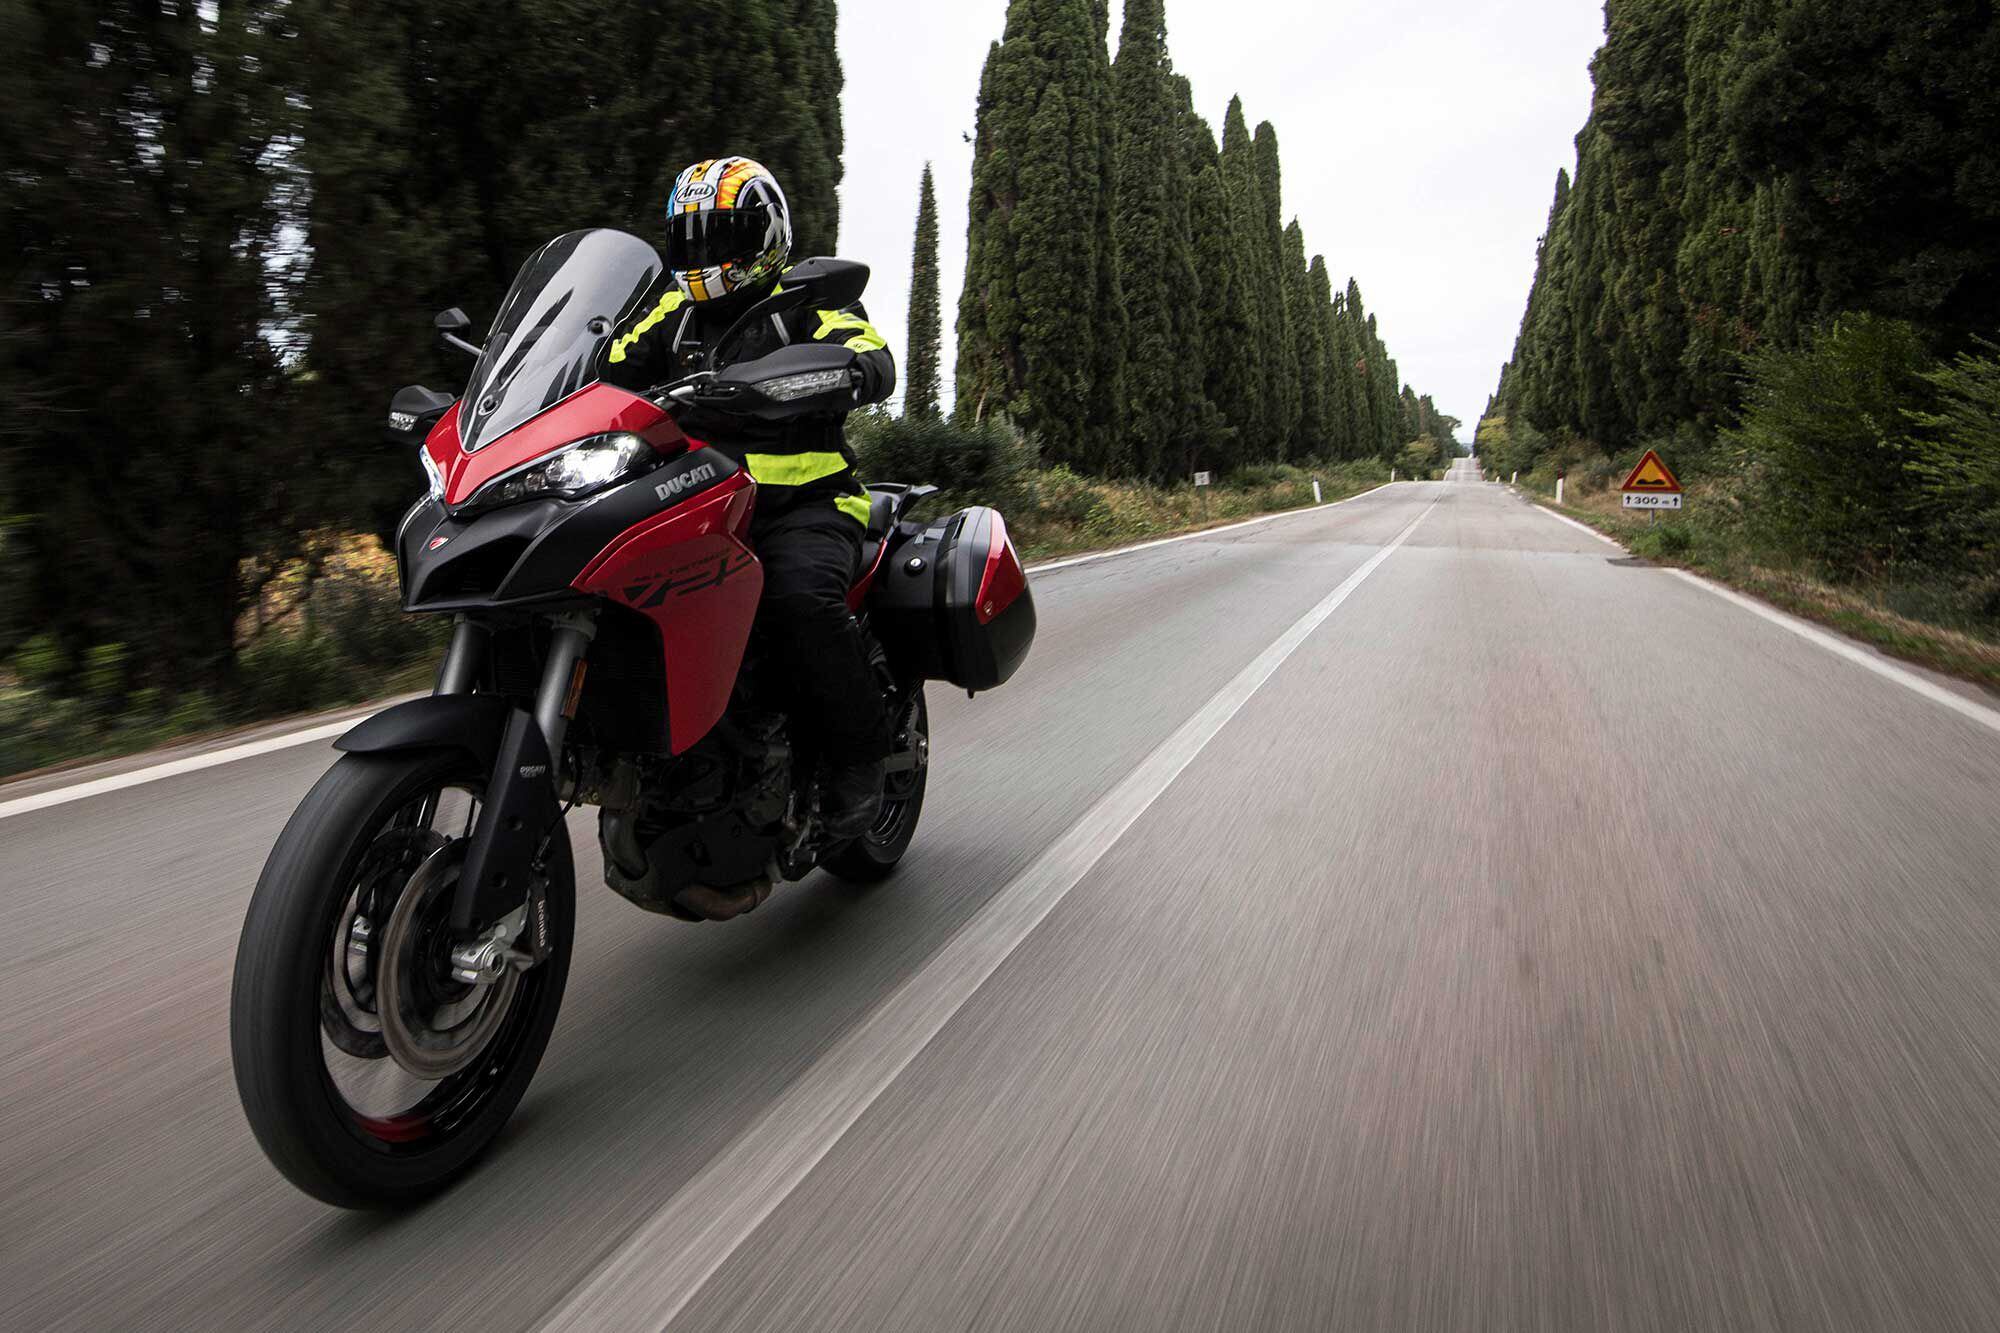 Ducati’s current evolution of the 937cc V-twin-powered Multistrada is capable, comfortable, and has plenty of power for an entirely enjoyable road trip.